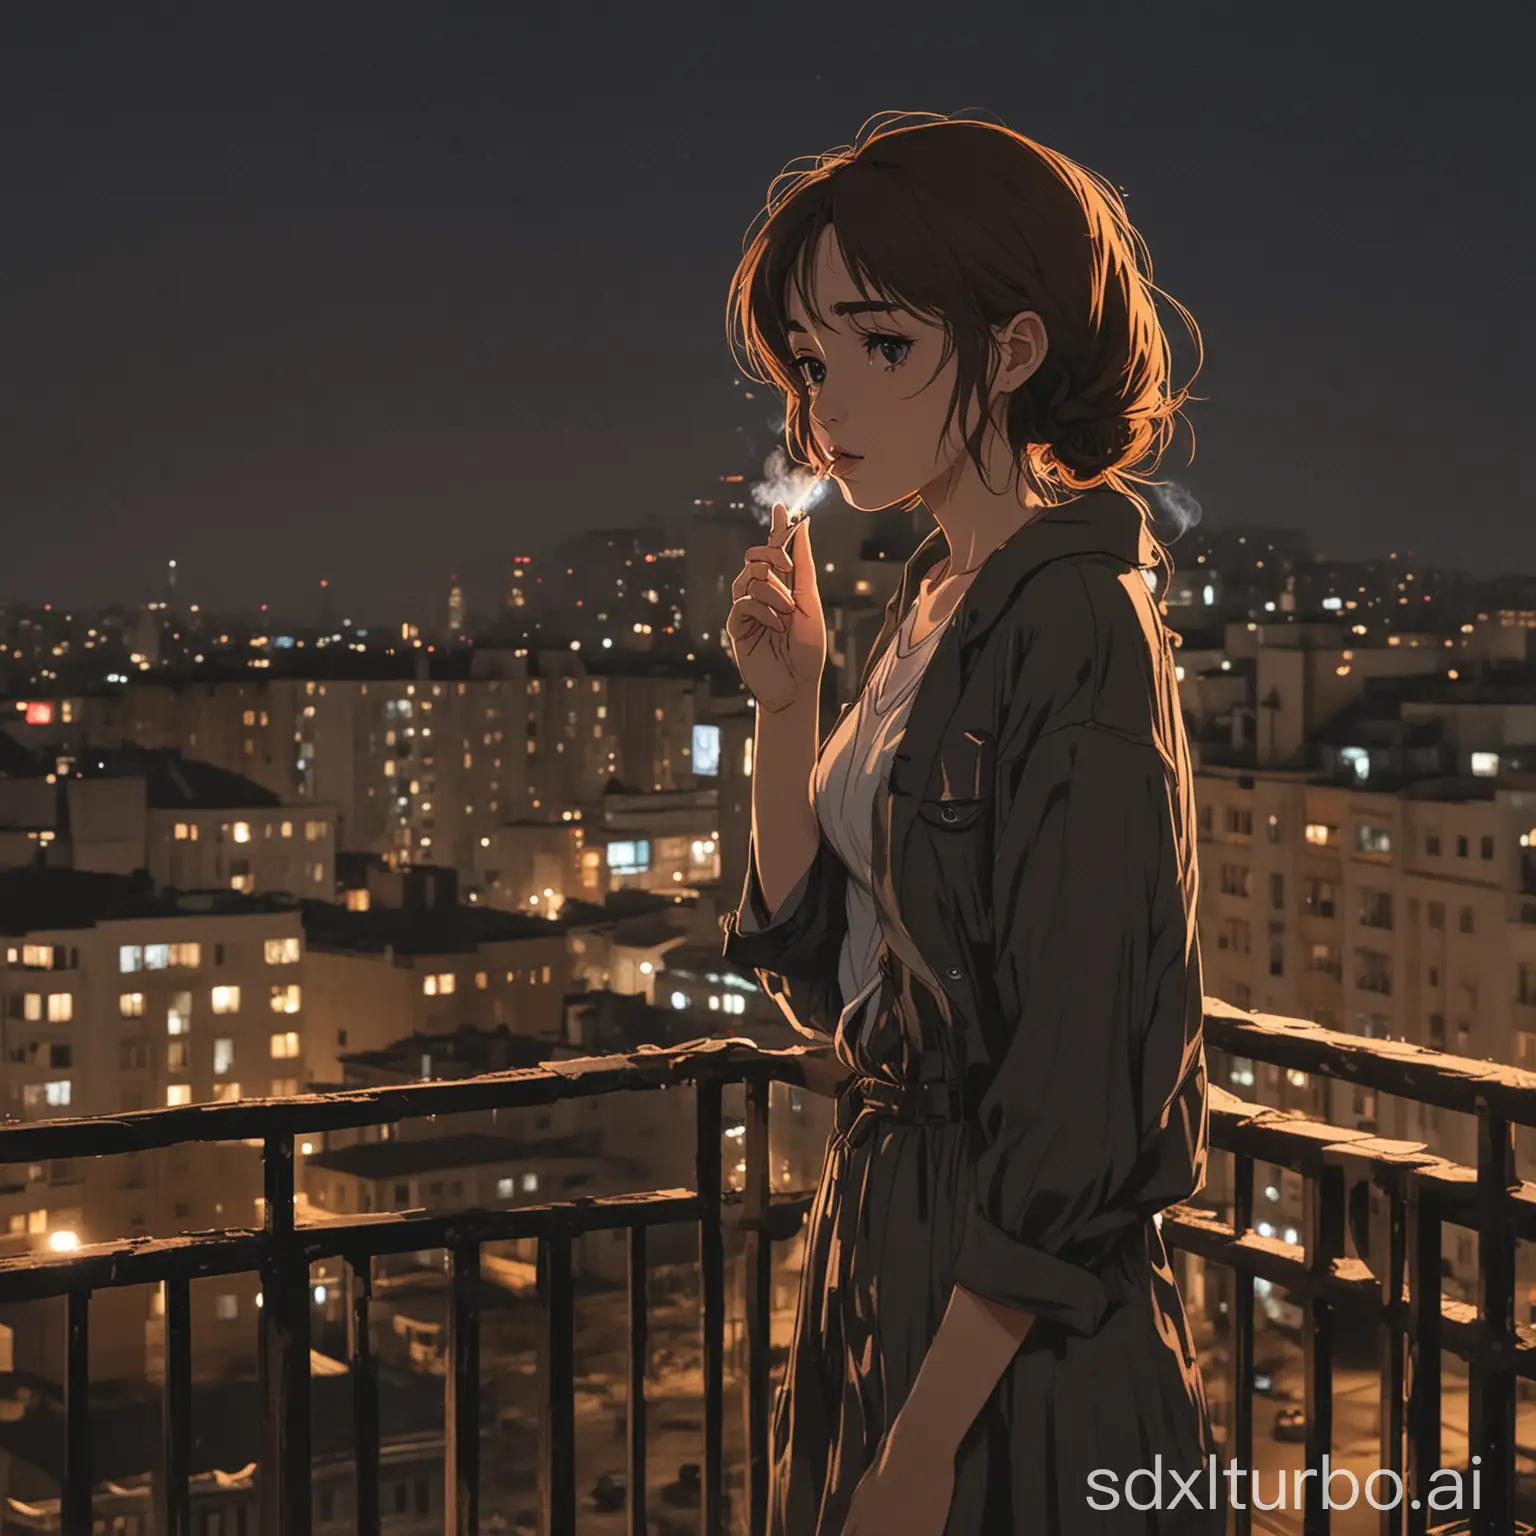 sad anime girl stands on open balcony in post-soviet setting smoking cigarette. time of day: night, city visible in background. setting: post-soviet country